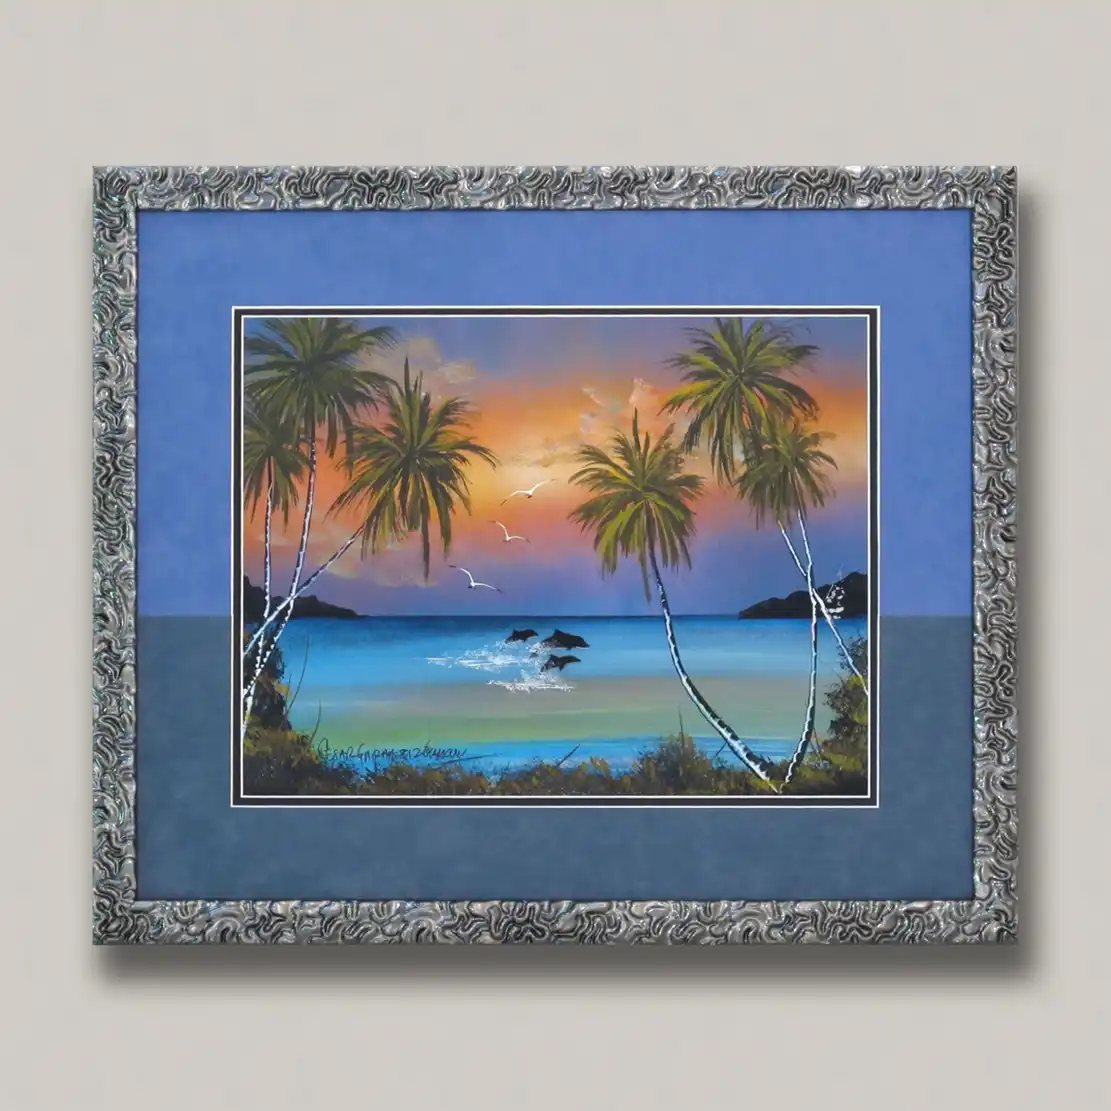 Pre Framed Wall Pictures Decor For sale C2165